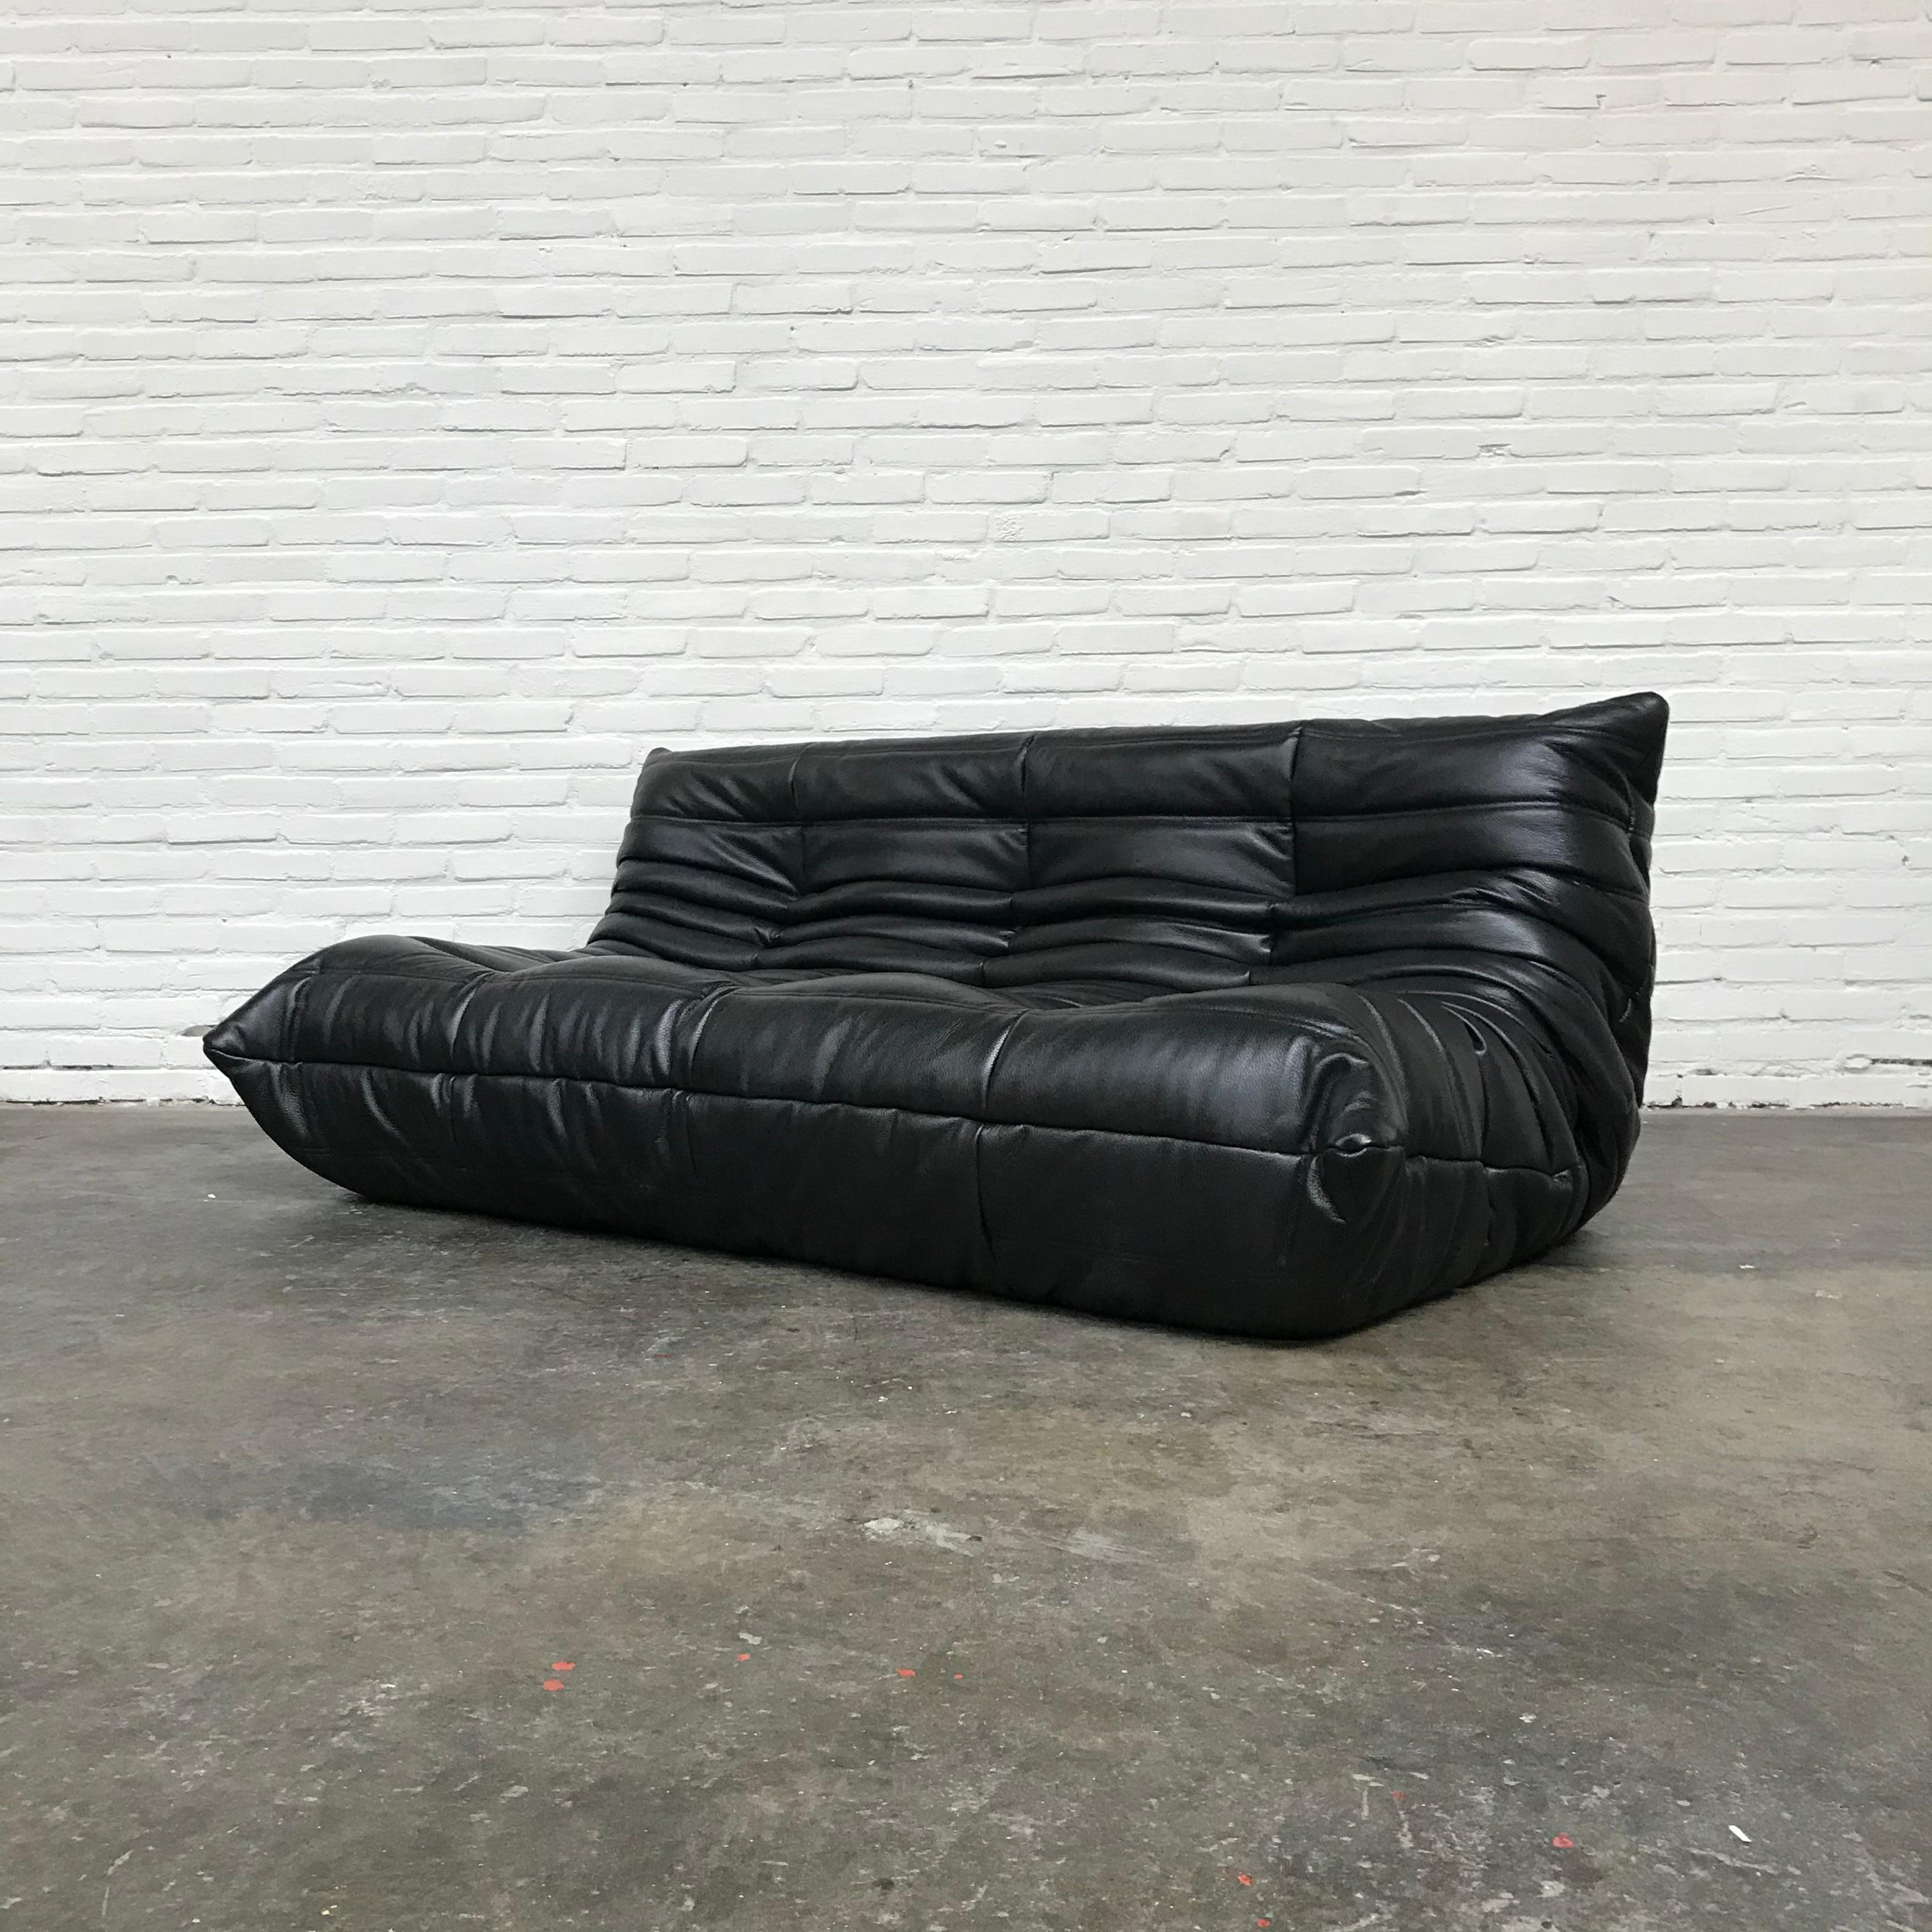 The Togo is designed by Michel Ducaroy in 1973 for Ligne Roset in 1973 but is still very popular today. This Togo is refurbished. Weak parts of foam have been replaced by firm new ones. Thereafter the sofa is reuphostered in Fine Italian black